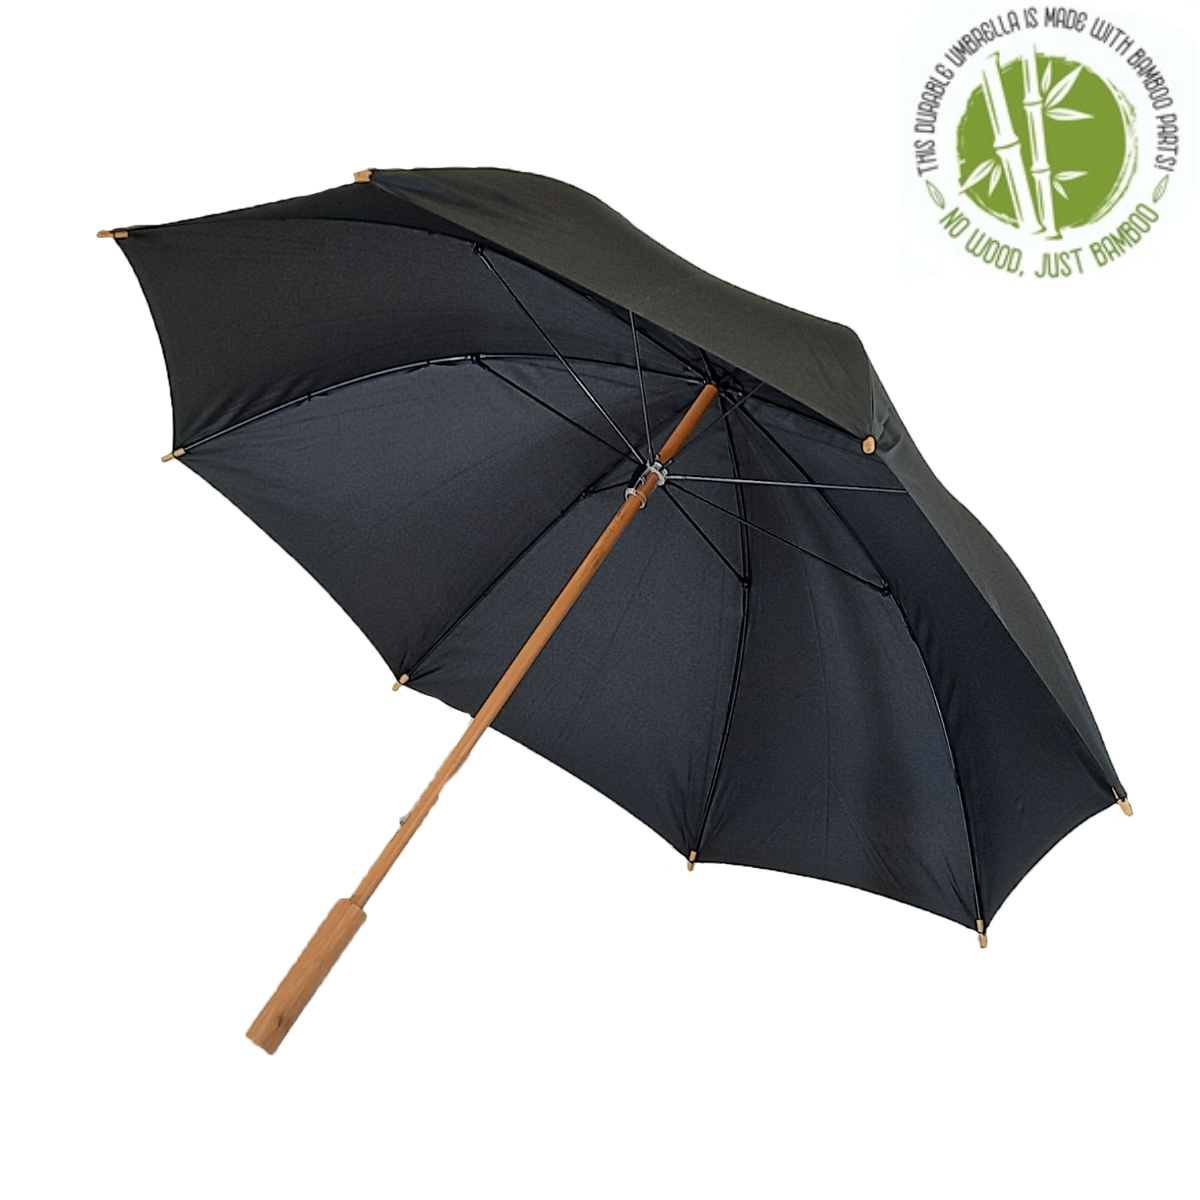 This is our wholesale black eco umbrella made from bamboo and RPET fabric.